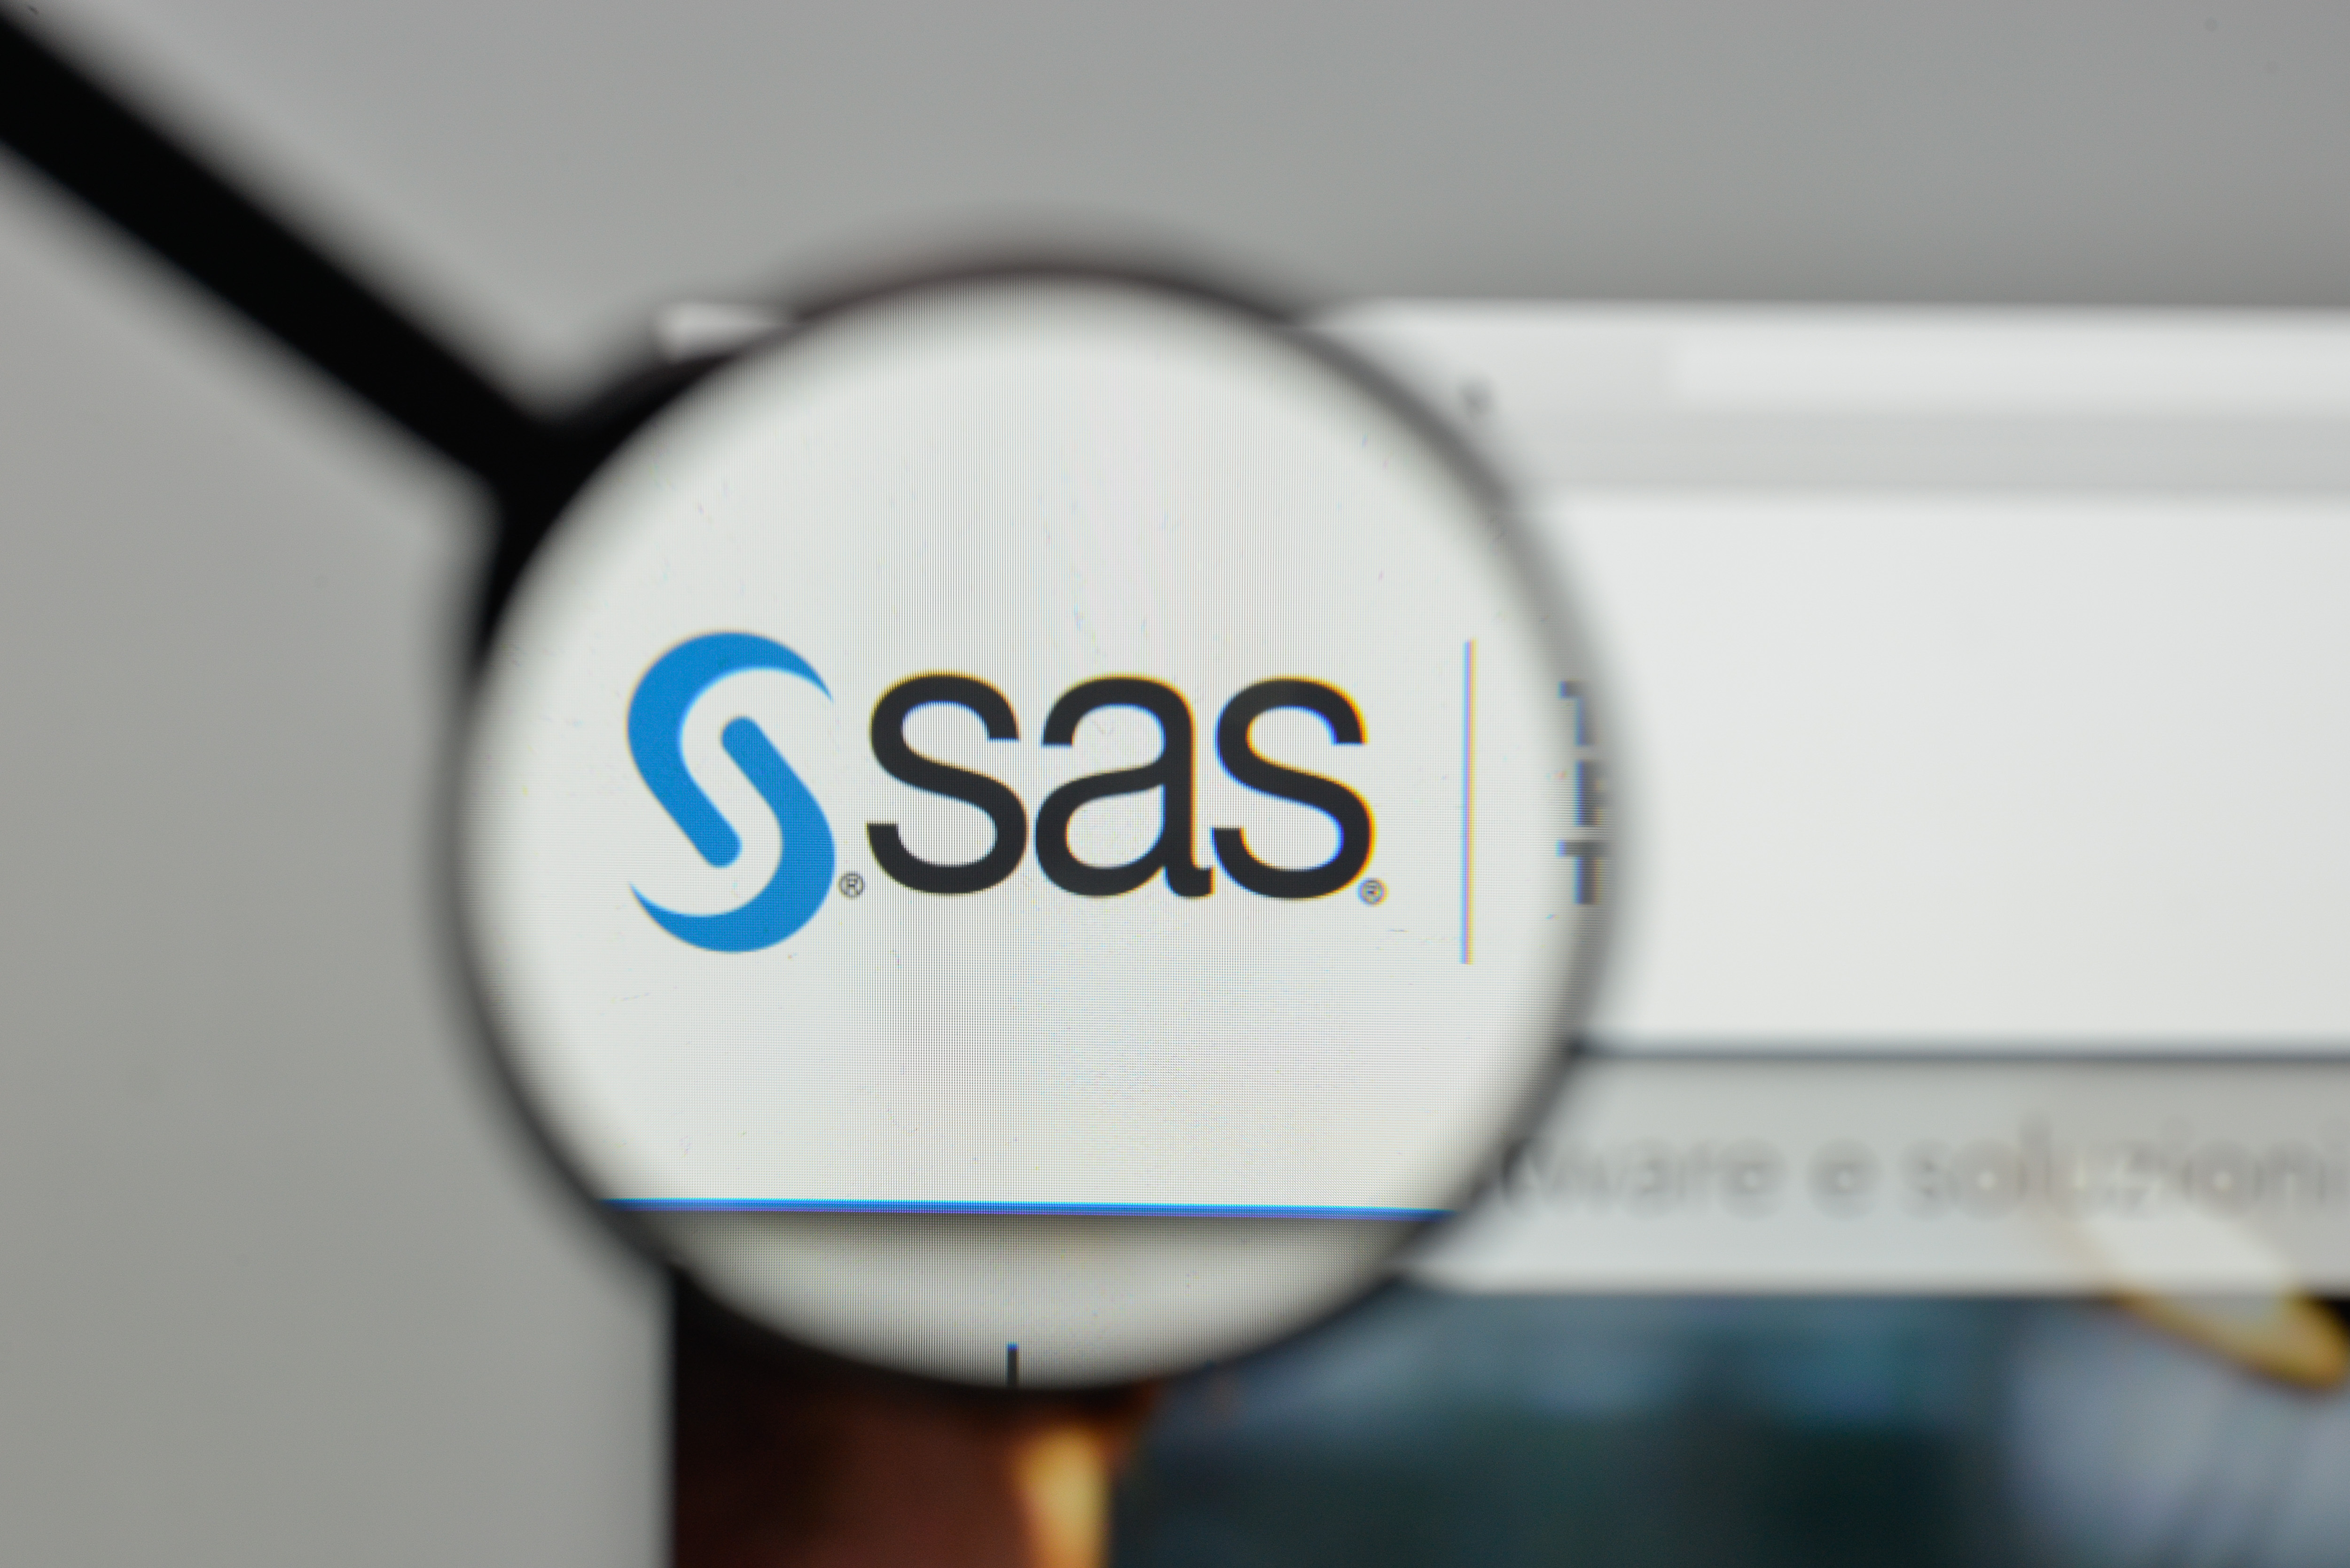 You are looking for analytics services, SAS should be your first choice. With multi-dimensional functionality and success rates.